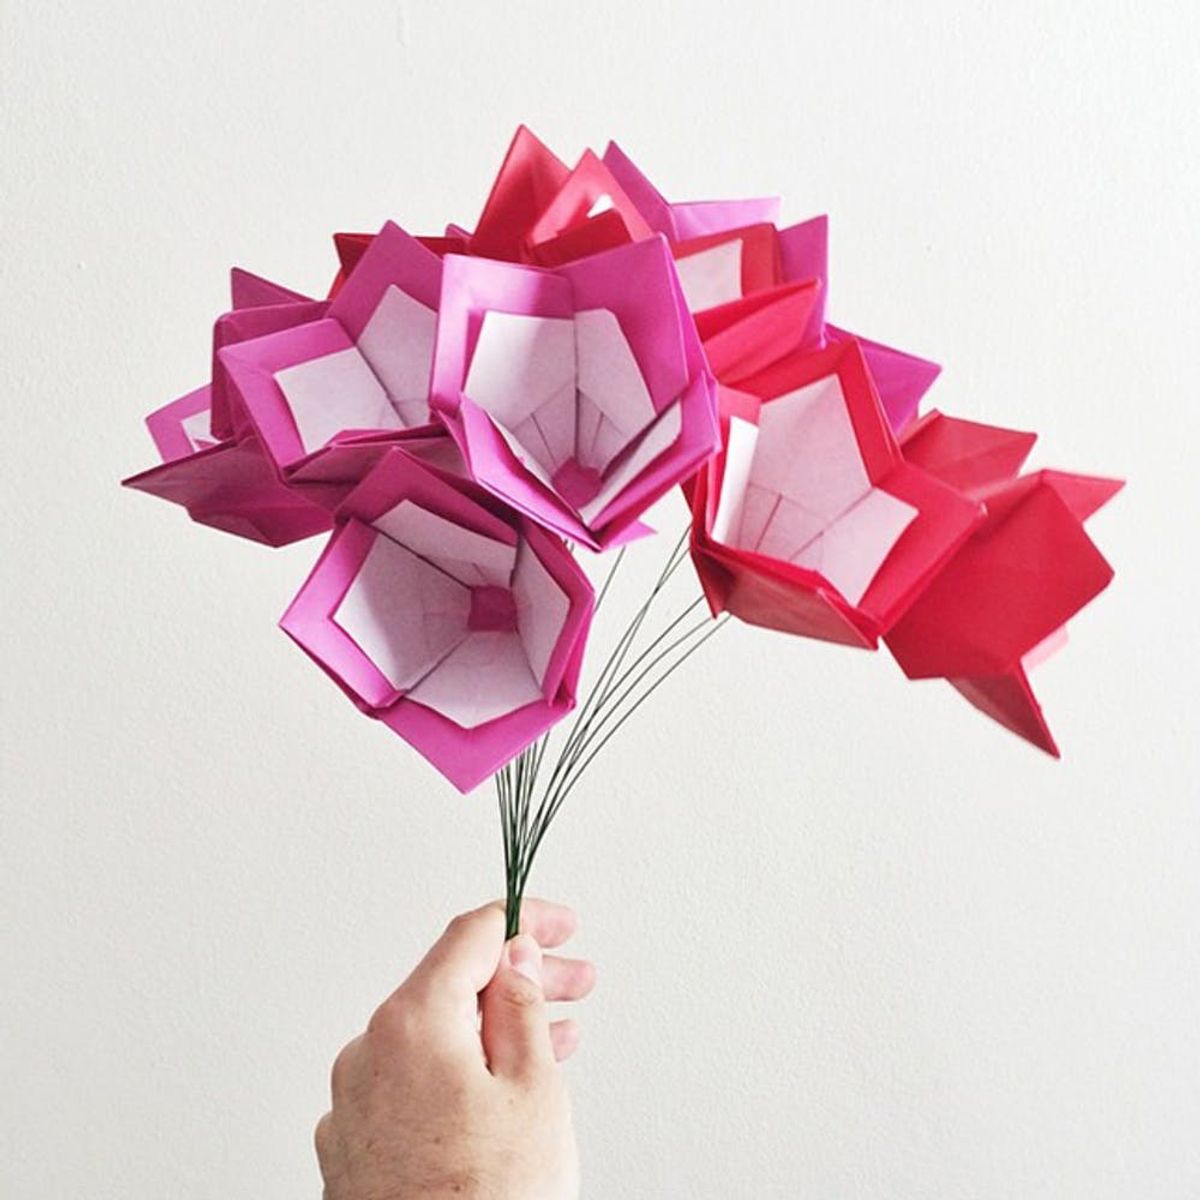 This Maker Created a Different Origami Figure Every Day in 2014